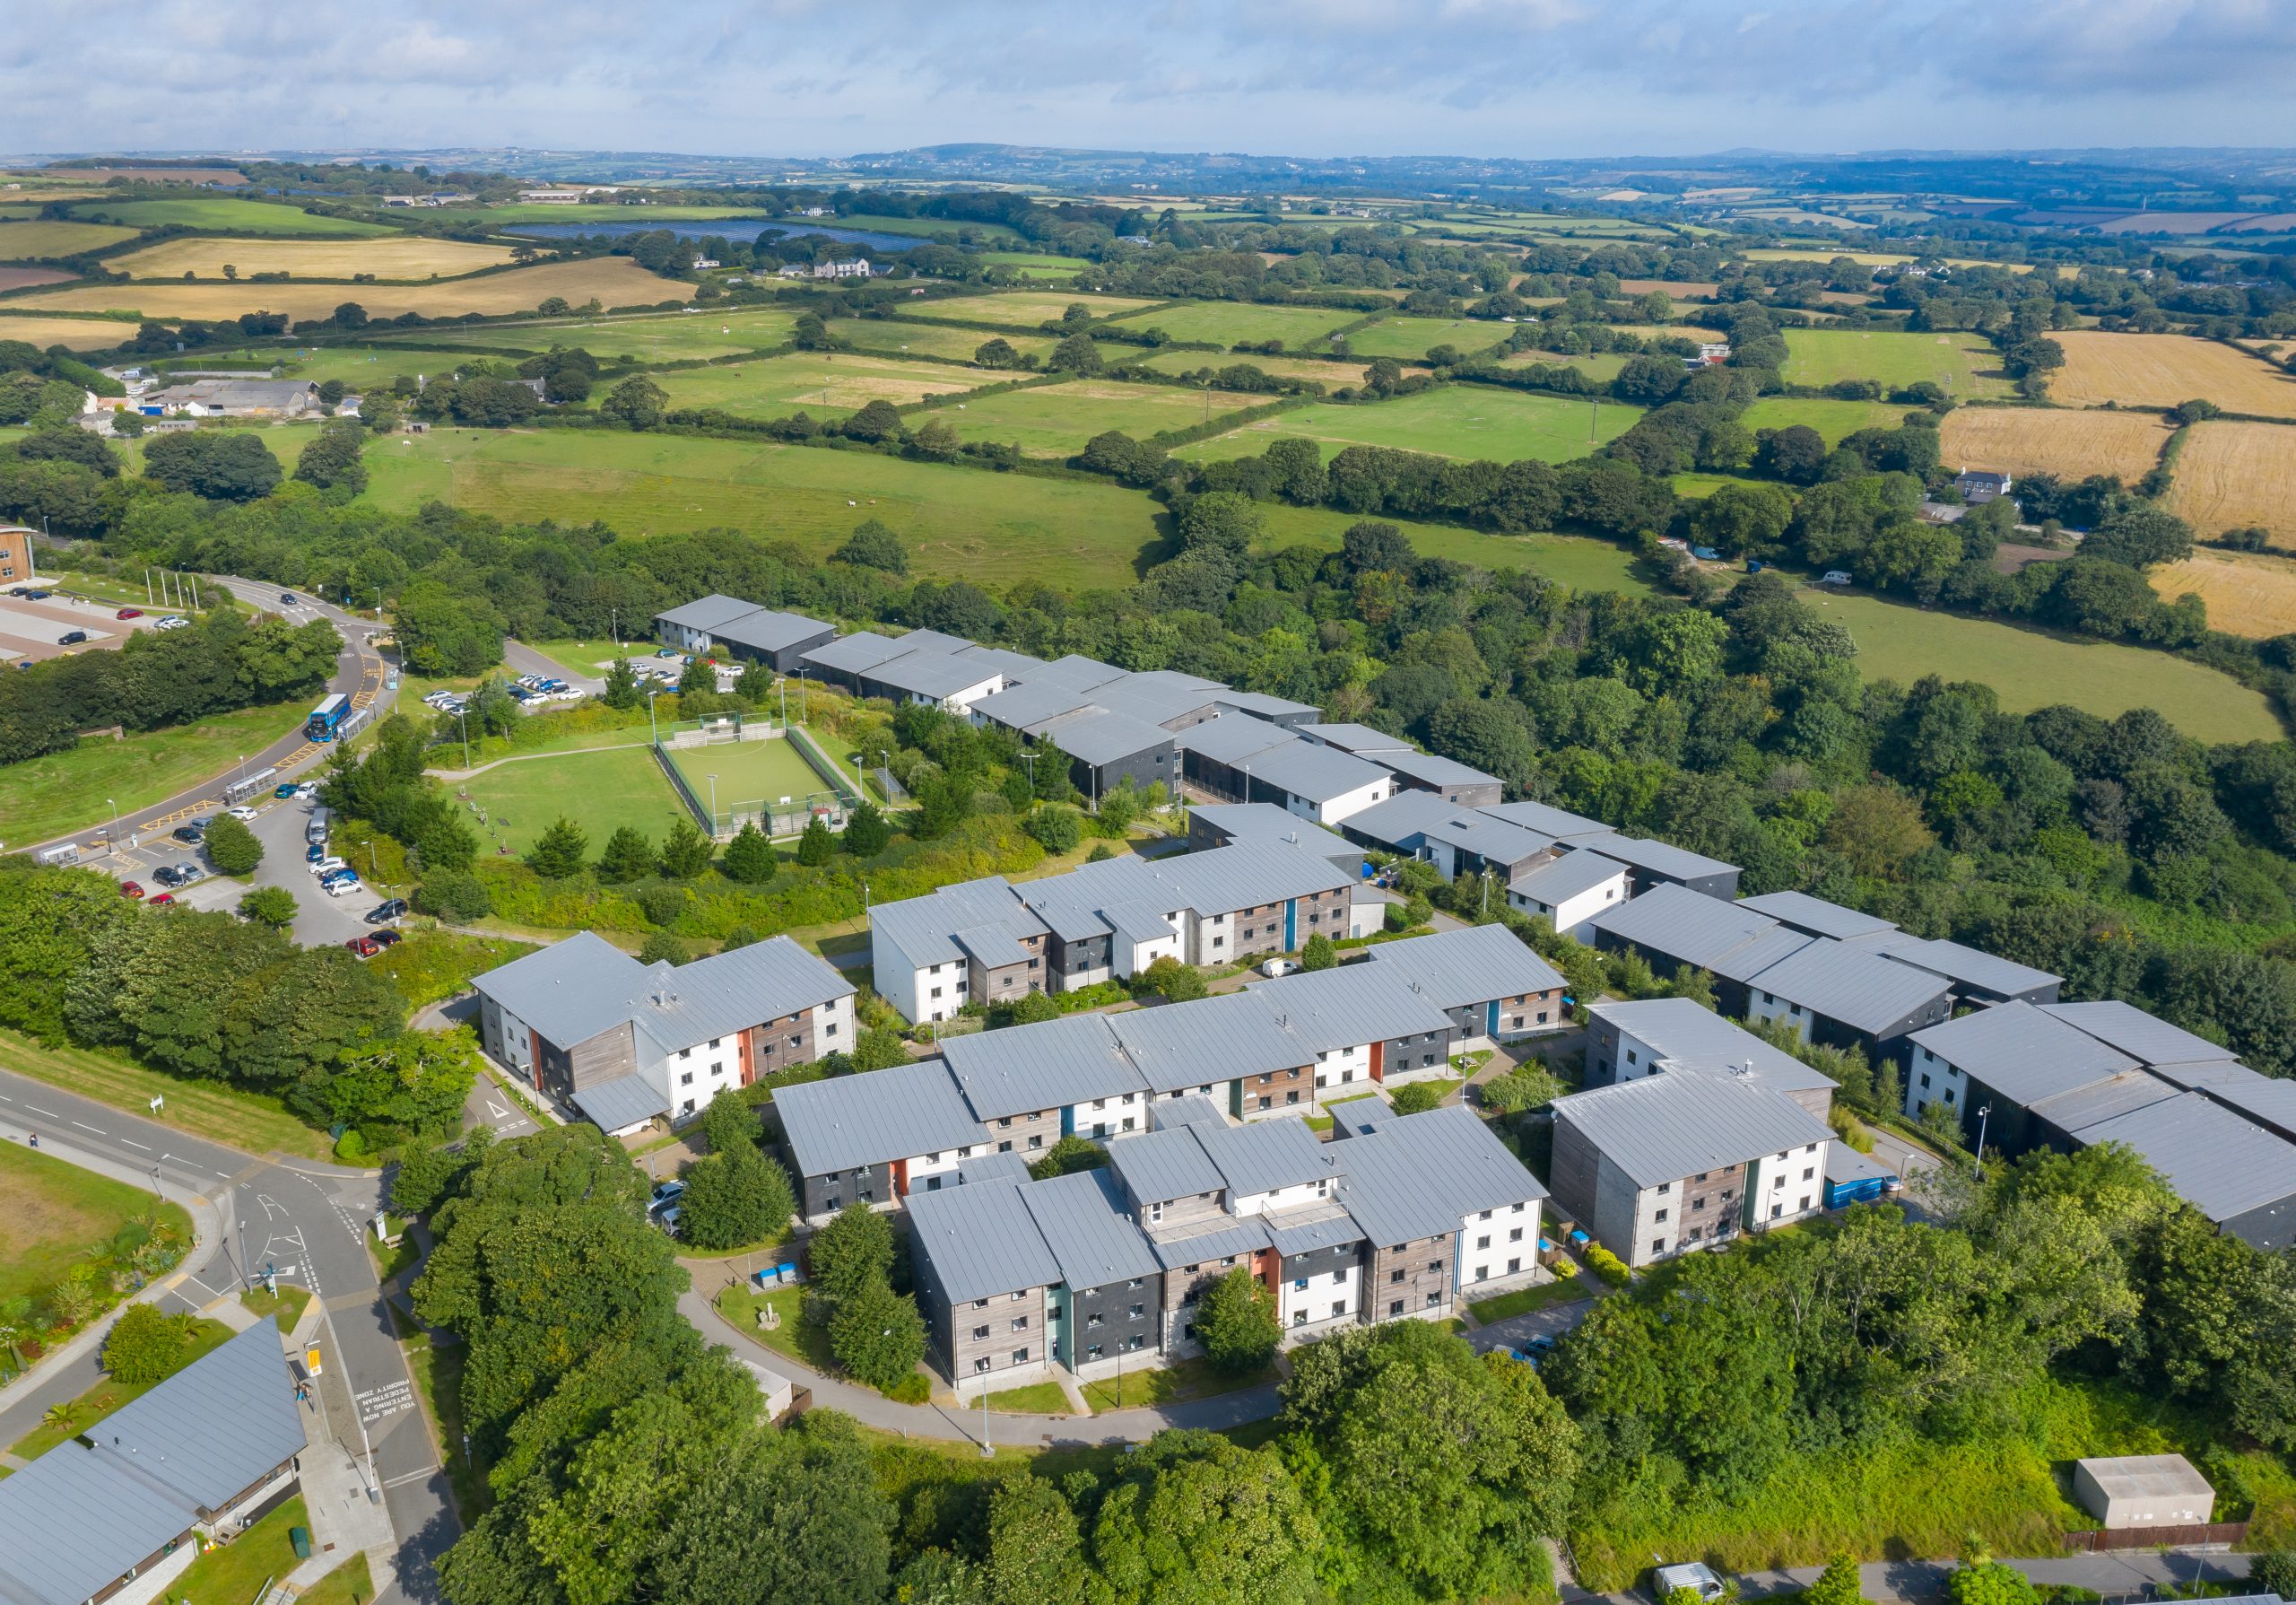 Aerial view of Glasney Village